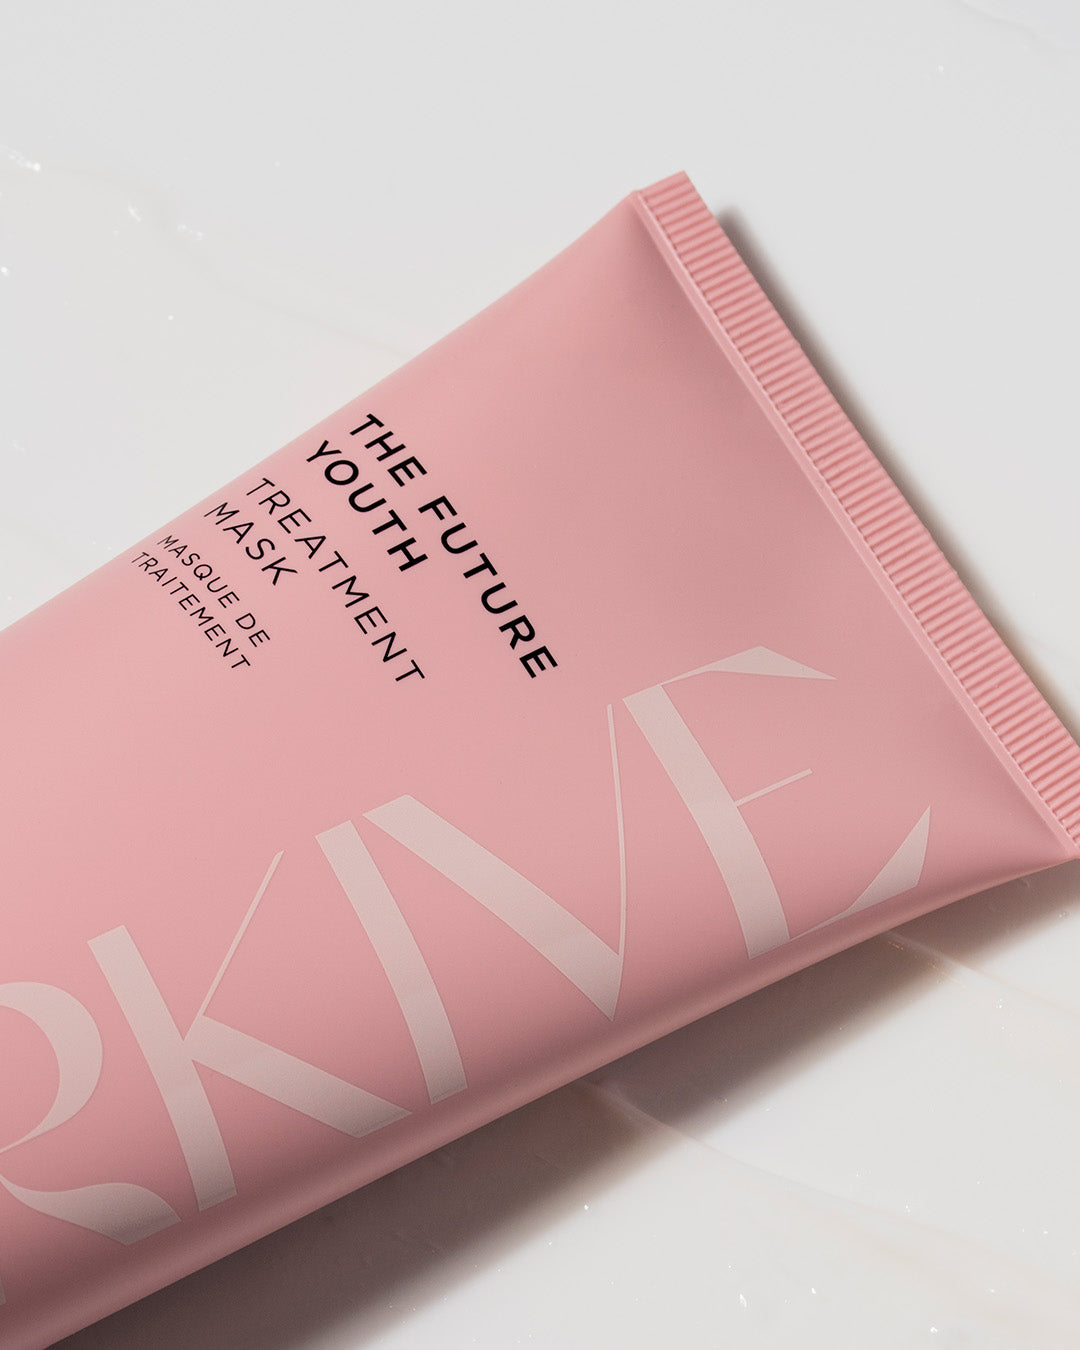 A close up shot of a bottle of Arkive's The Future Youth hair treatment mask